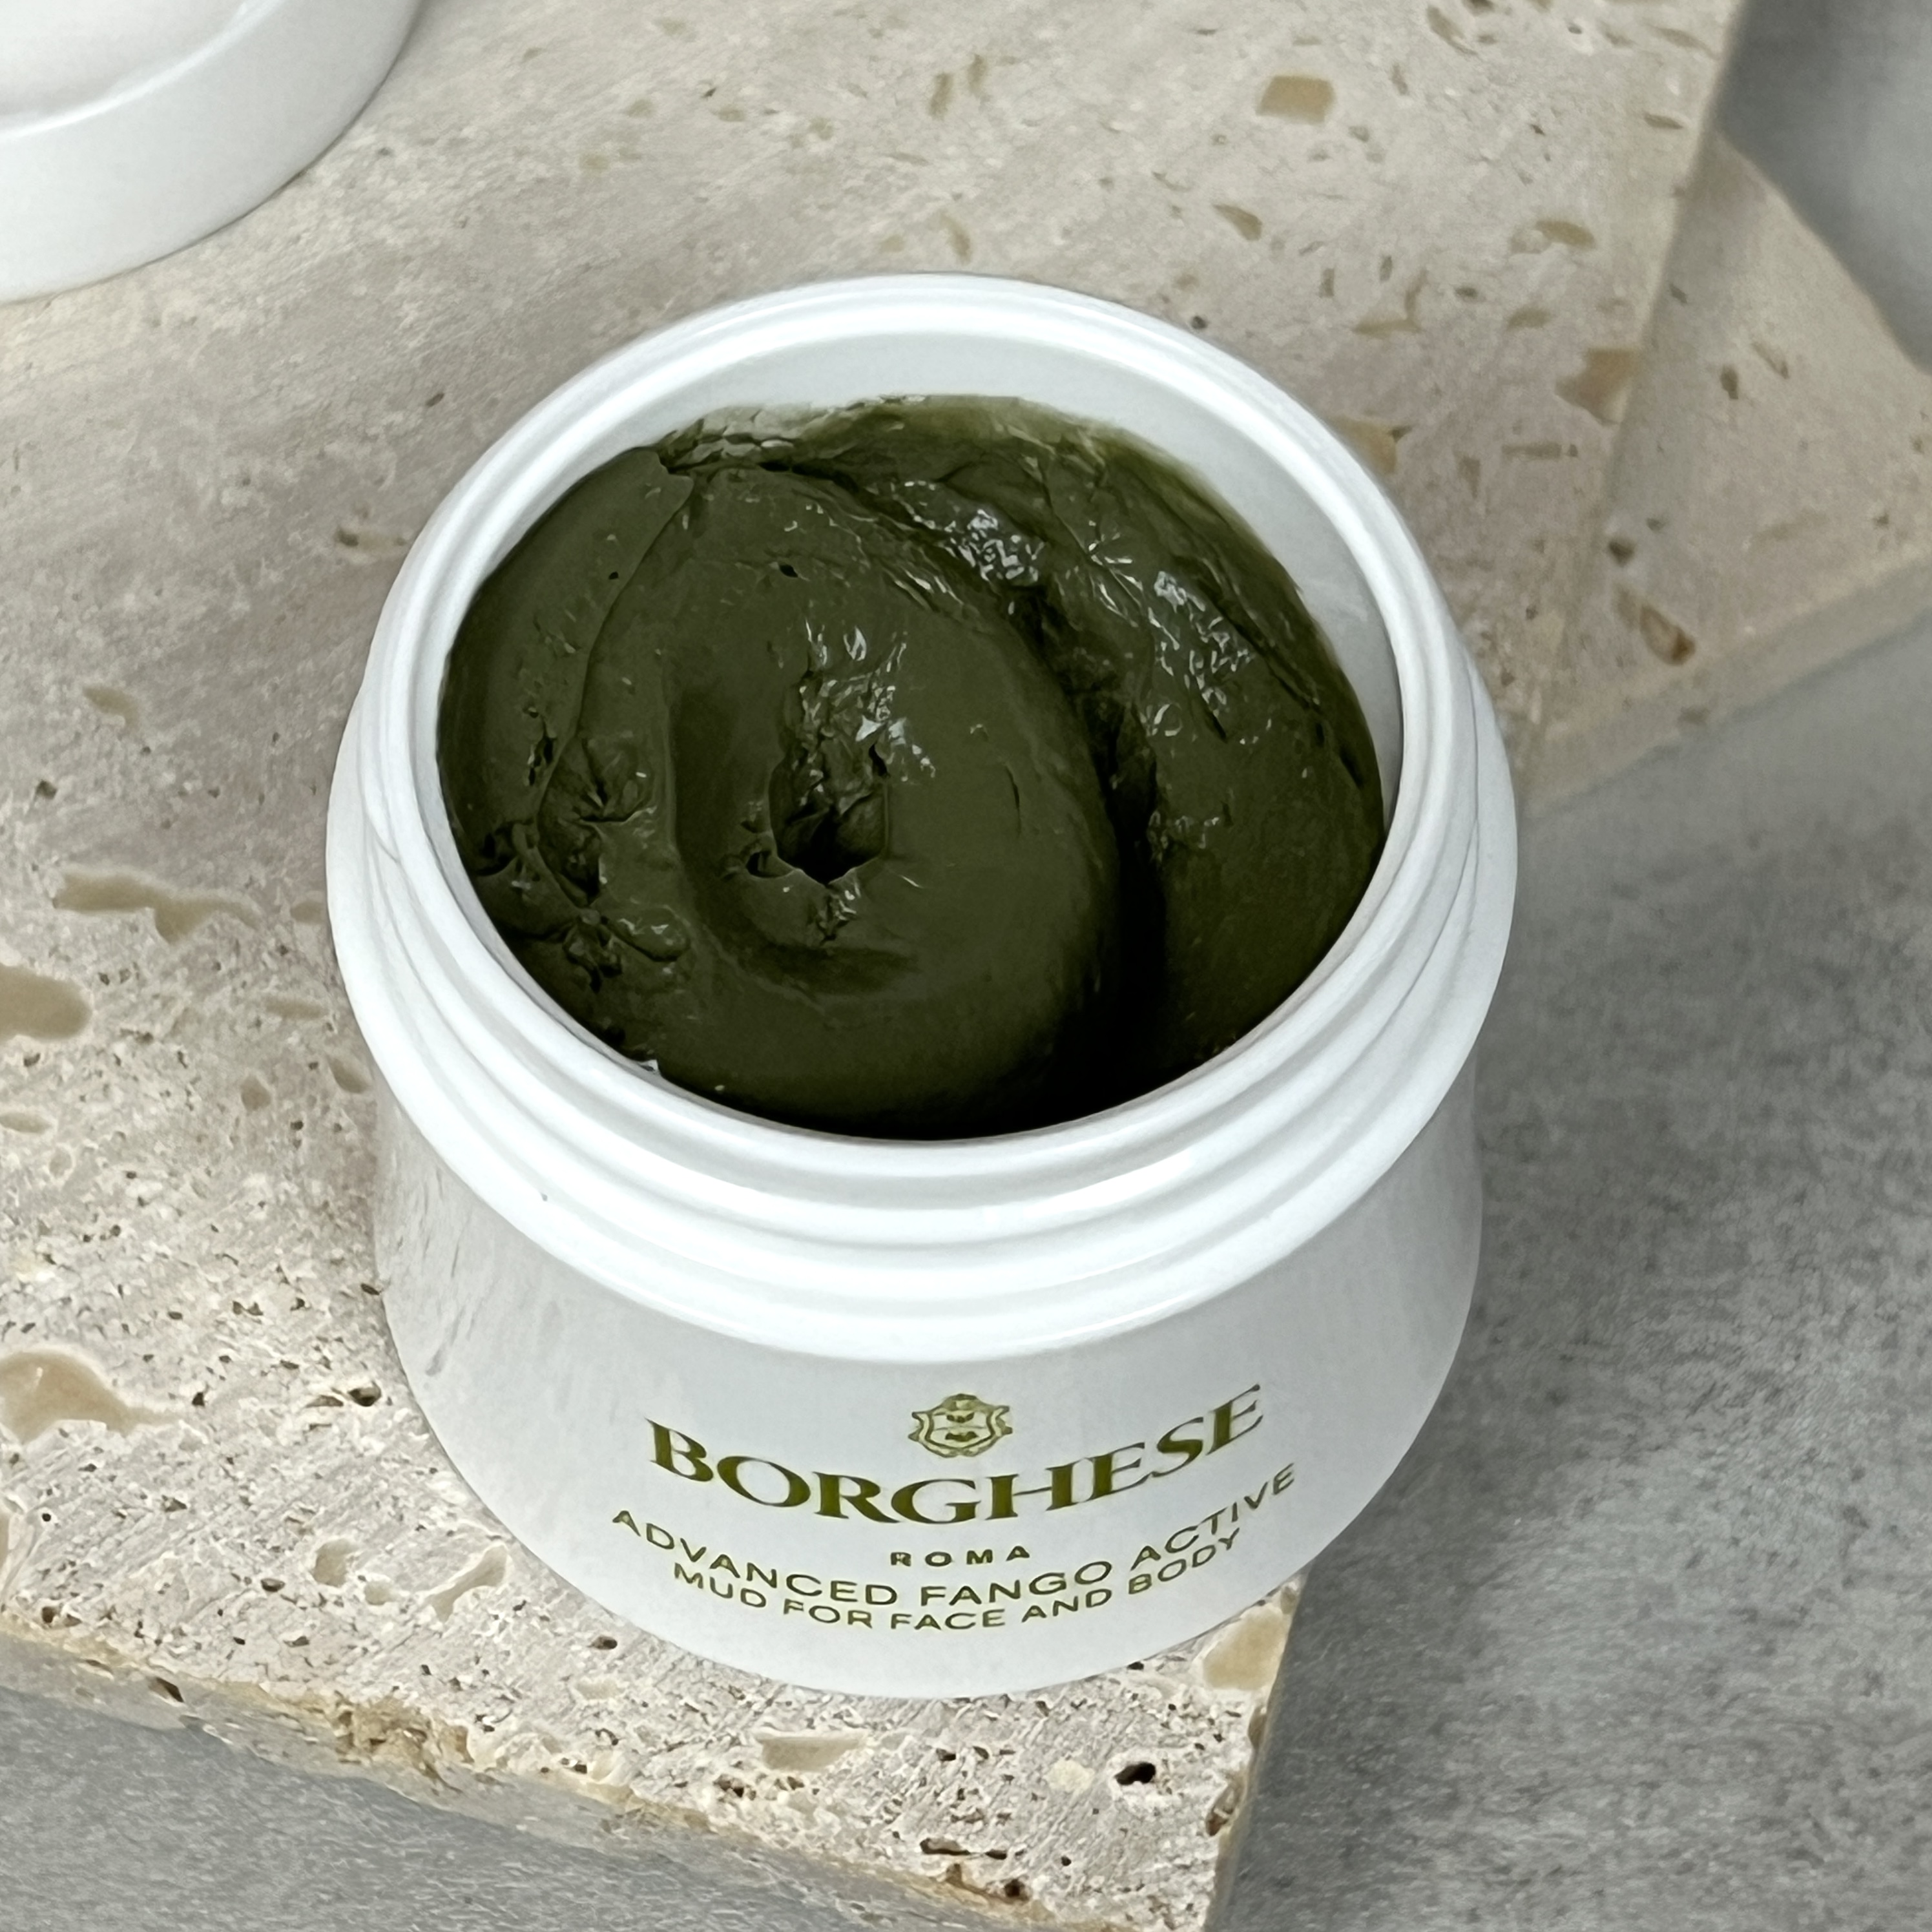 Open Shot of Borghese Roma Active Mud for GlossyBox December 2022